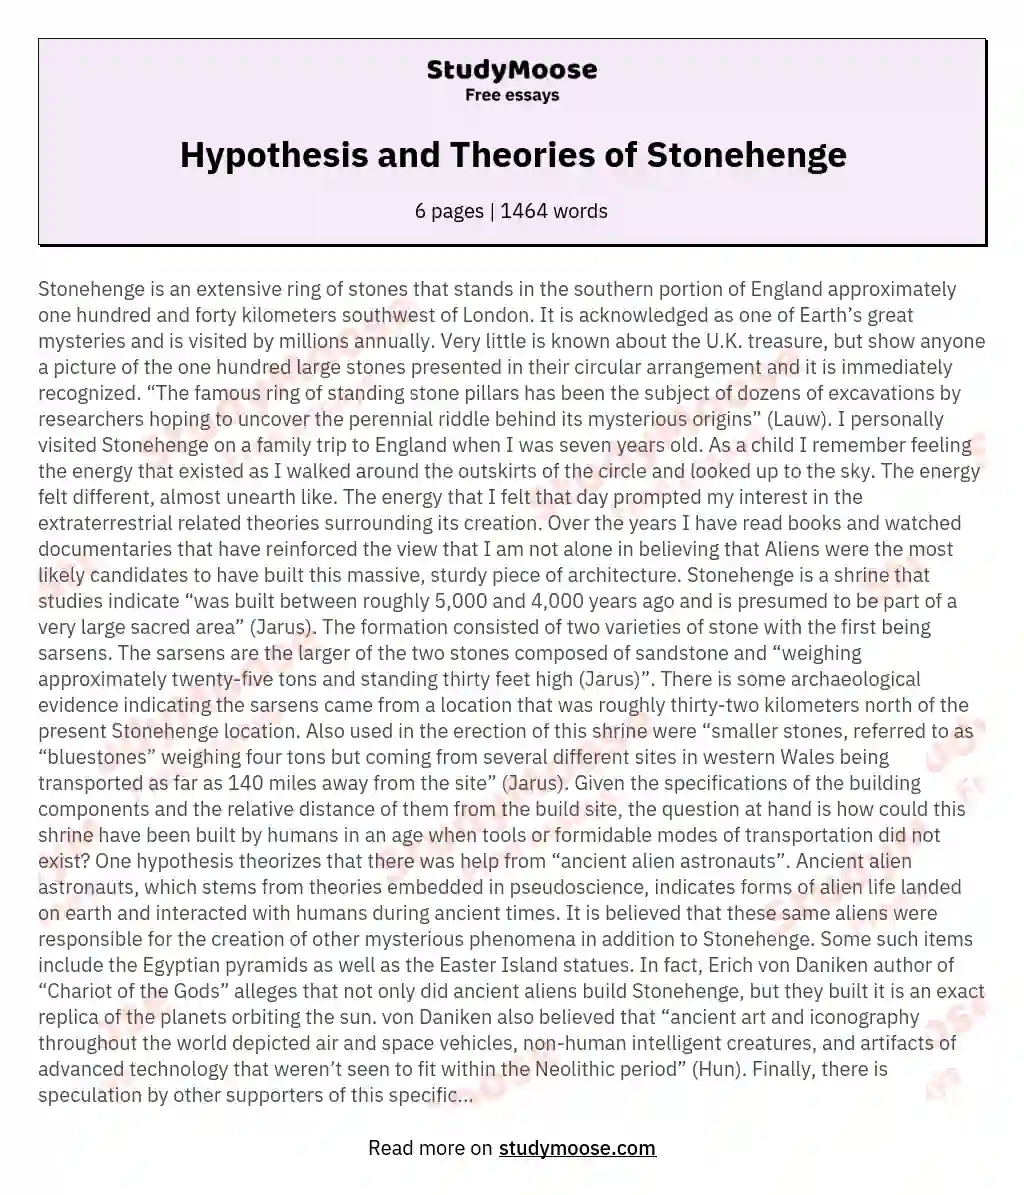 Hypothesis and Theories of Stonehenge essay